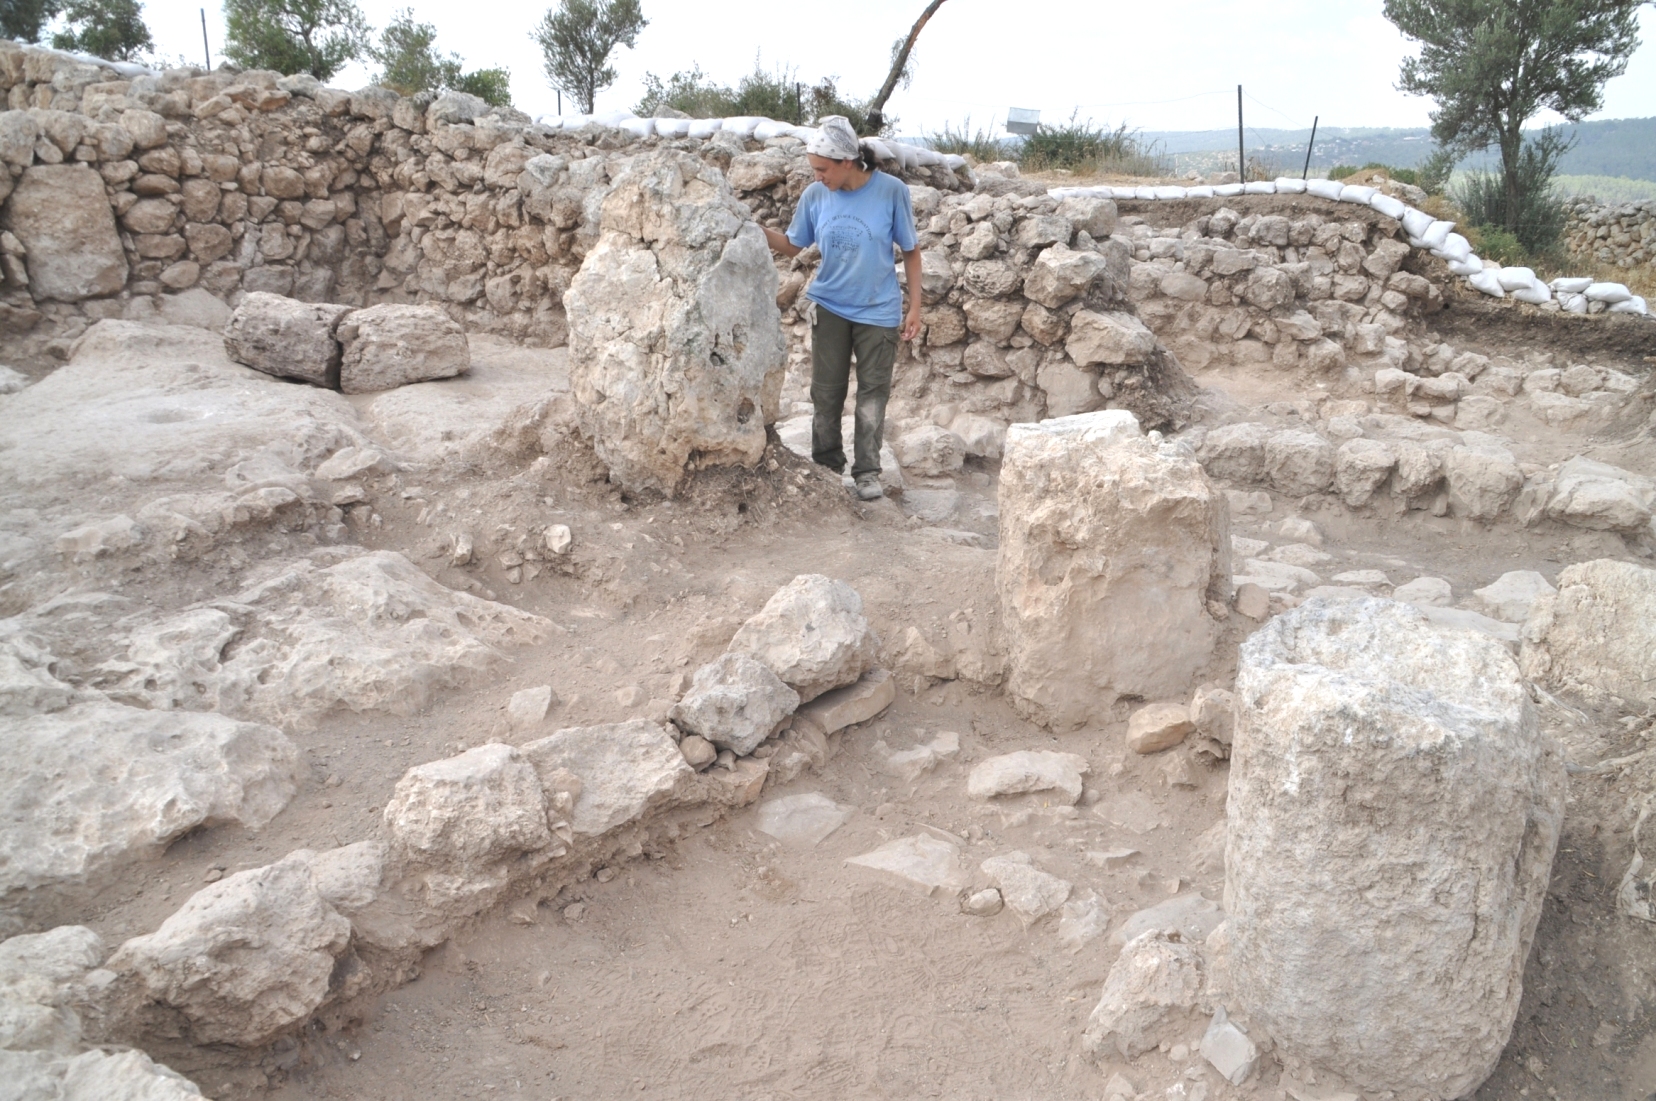 Illustration 6: A pillared storage structure at Khirbet Qeiyafa, of the type common in the Iron Age at a number of sites such as Hazor and Beer Sheva (photo courtesy of the excavation expedition)